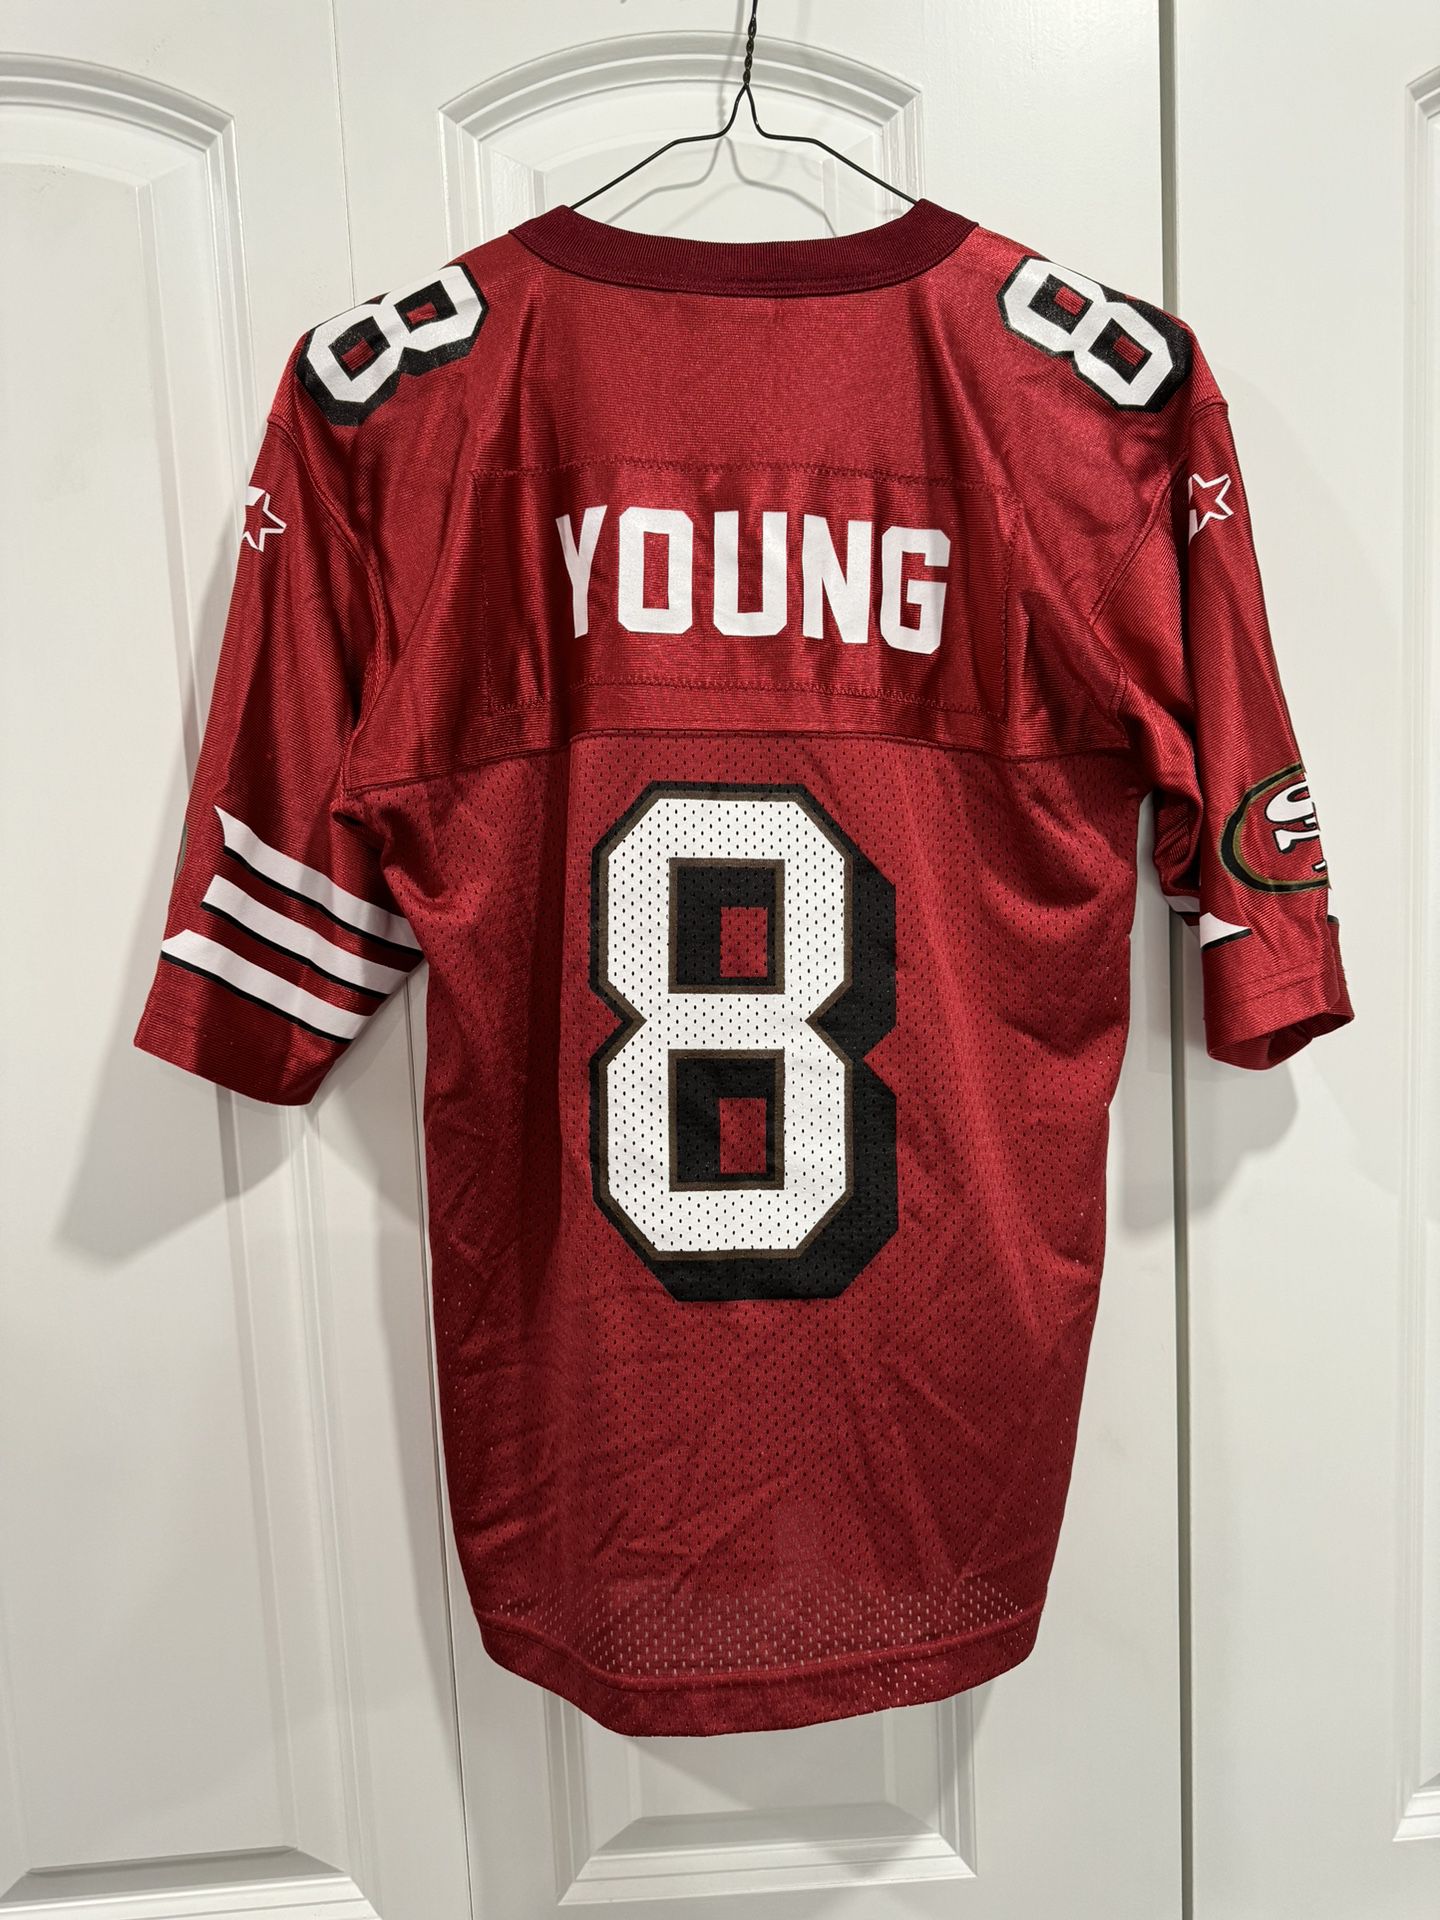 Vintage 49ers Steve Young Jersey Size S $40